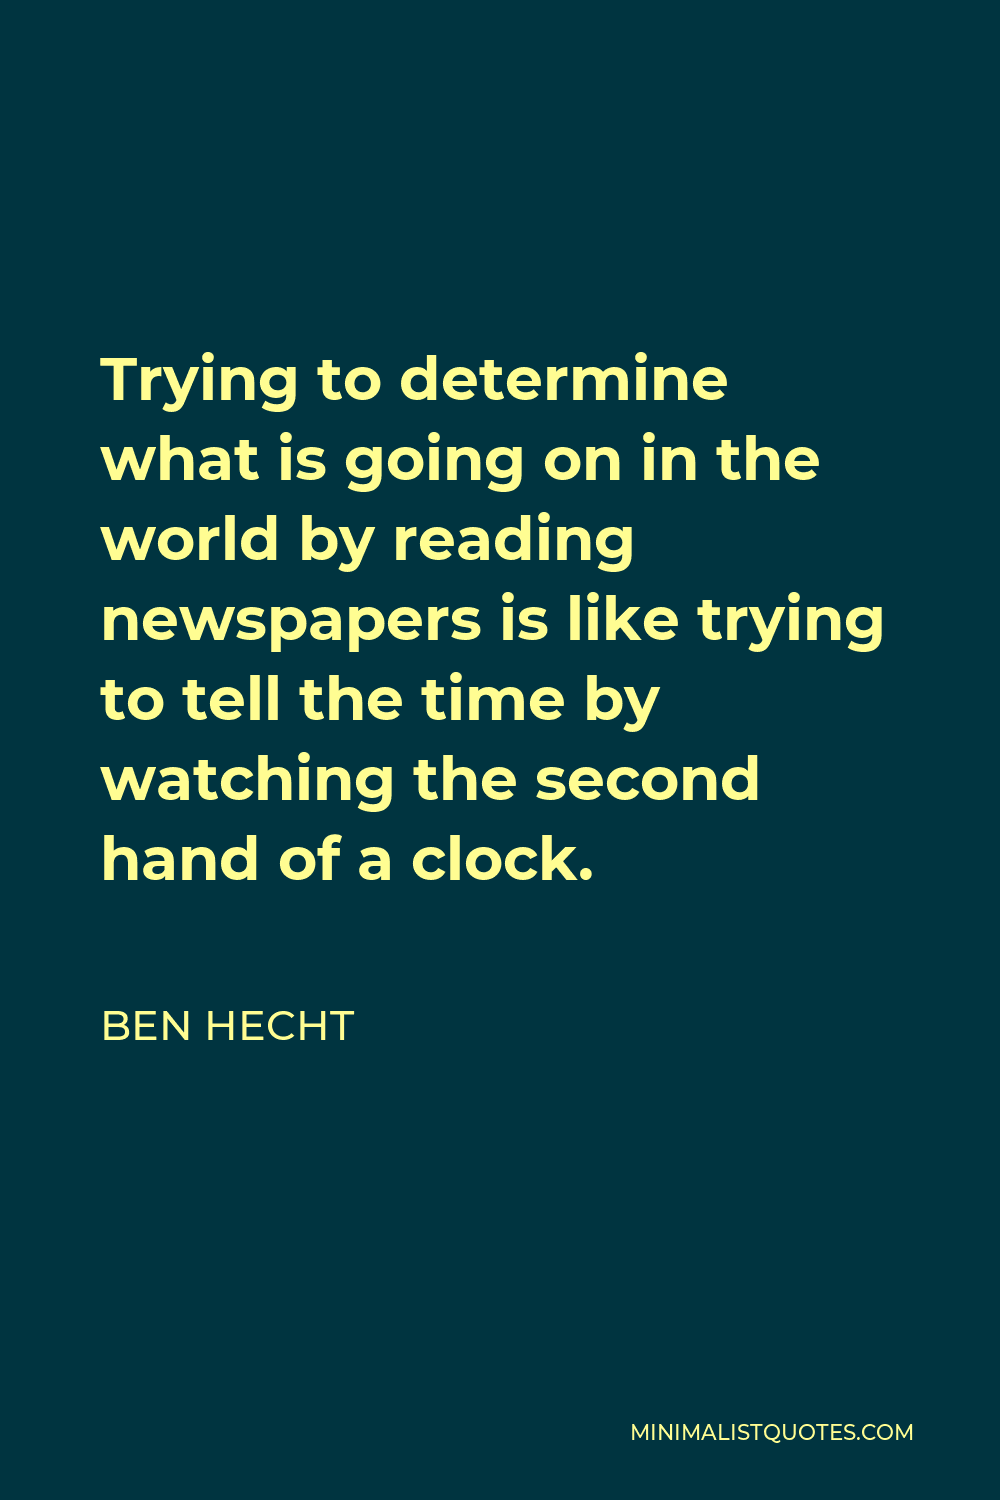 Ben Hecht Quote - Trying to determine what is going on in the world by reading newspapers is like trying to tell the time by watching the second hand of a clock.